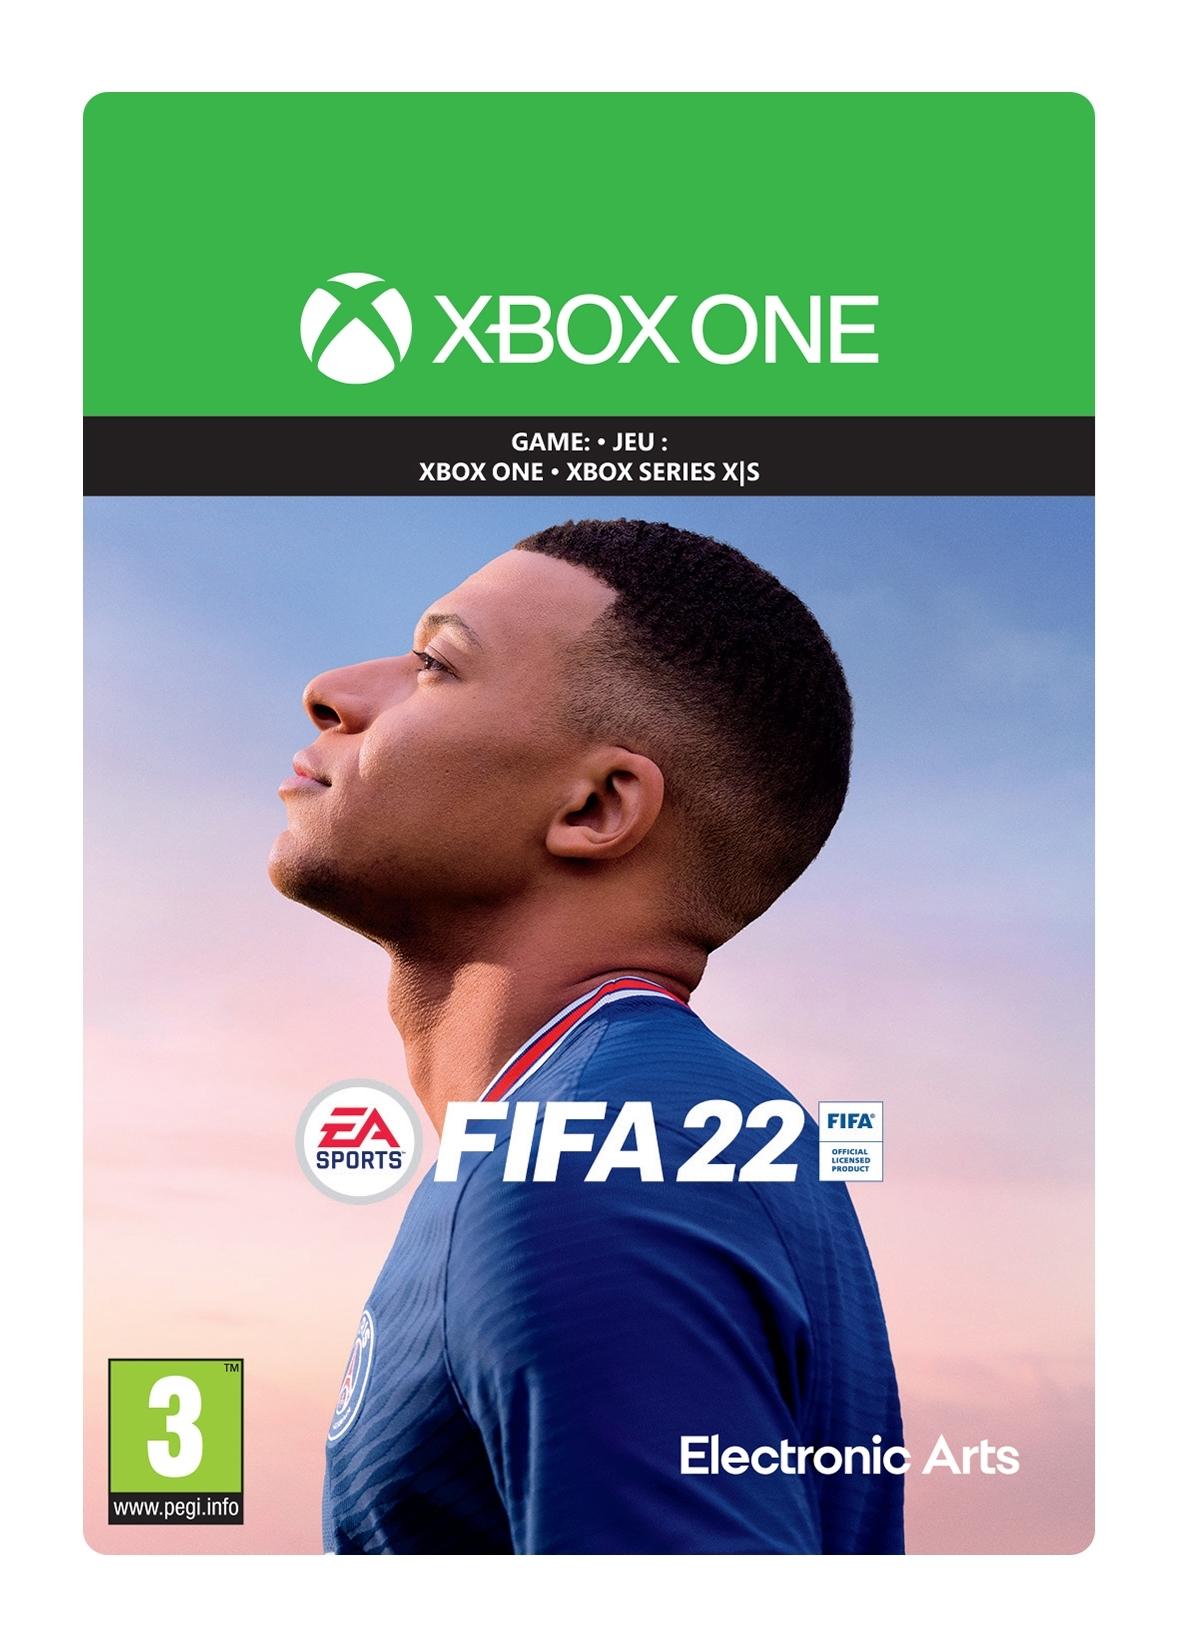 FIFA 22: Standard Edition - Xbox One/Plays on Xbox Series X - Game | G3Q-01179 (a80afe75-3541-5646-a33d-60d0760b762d)